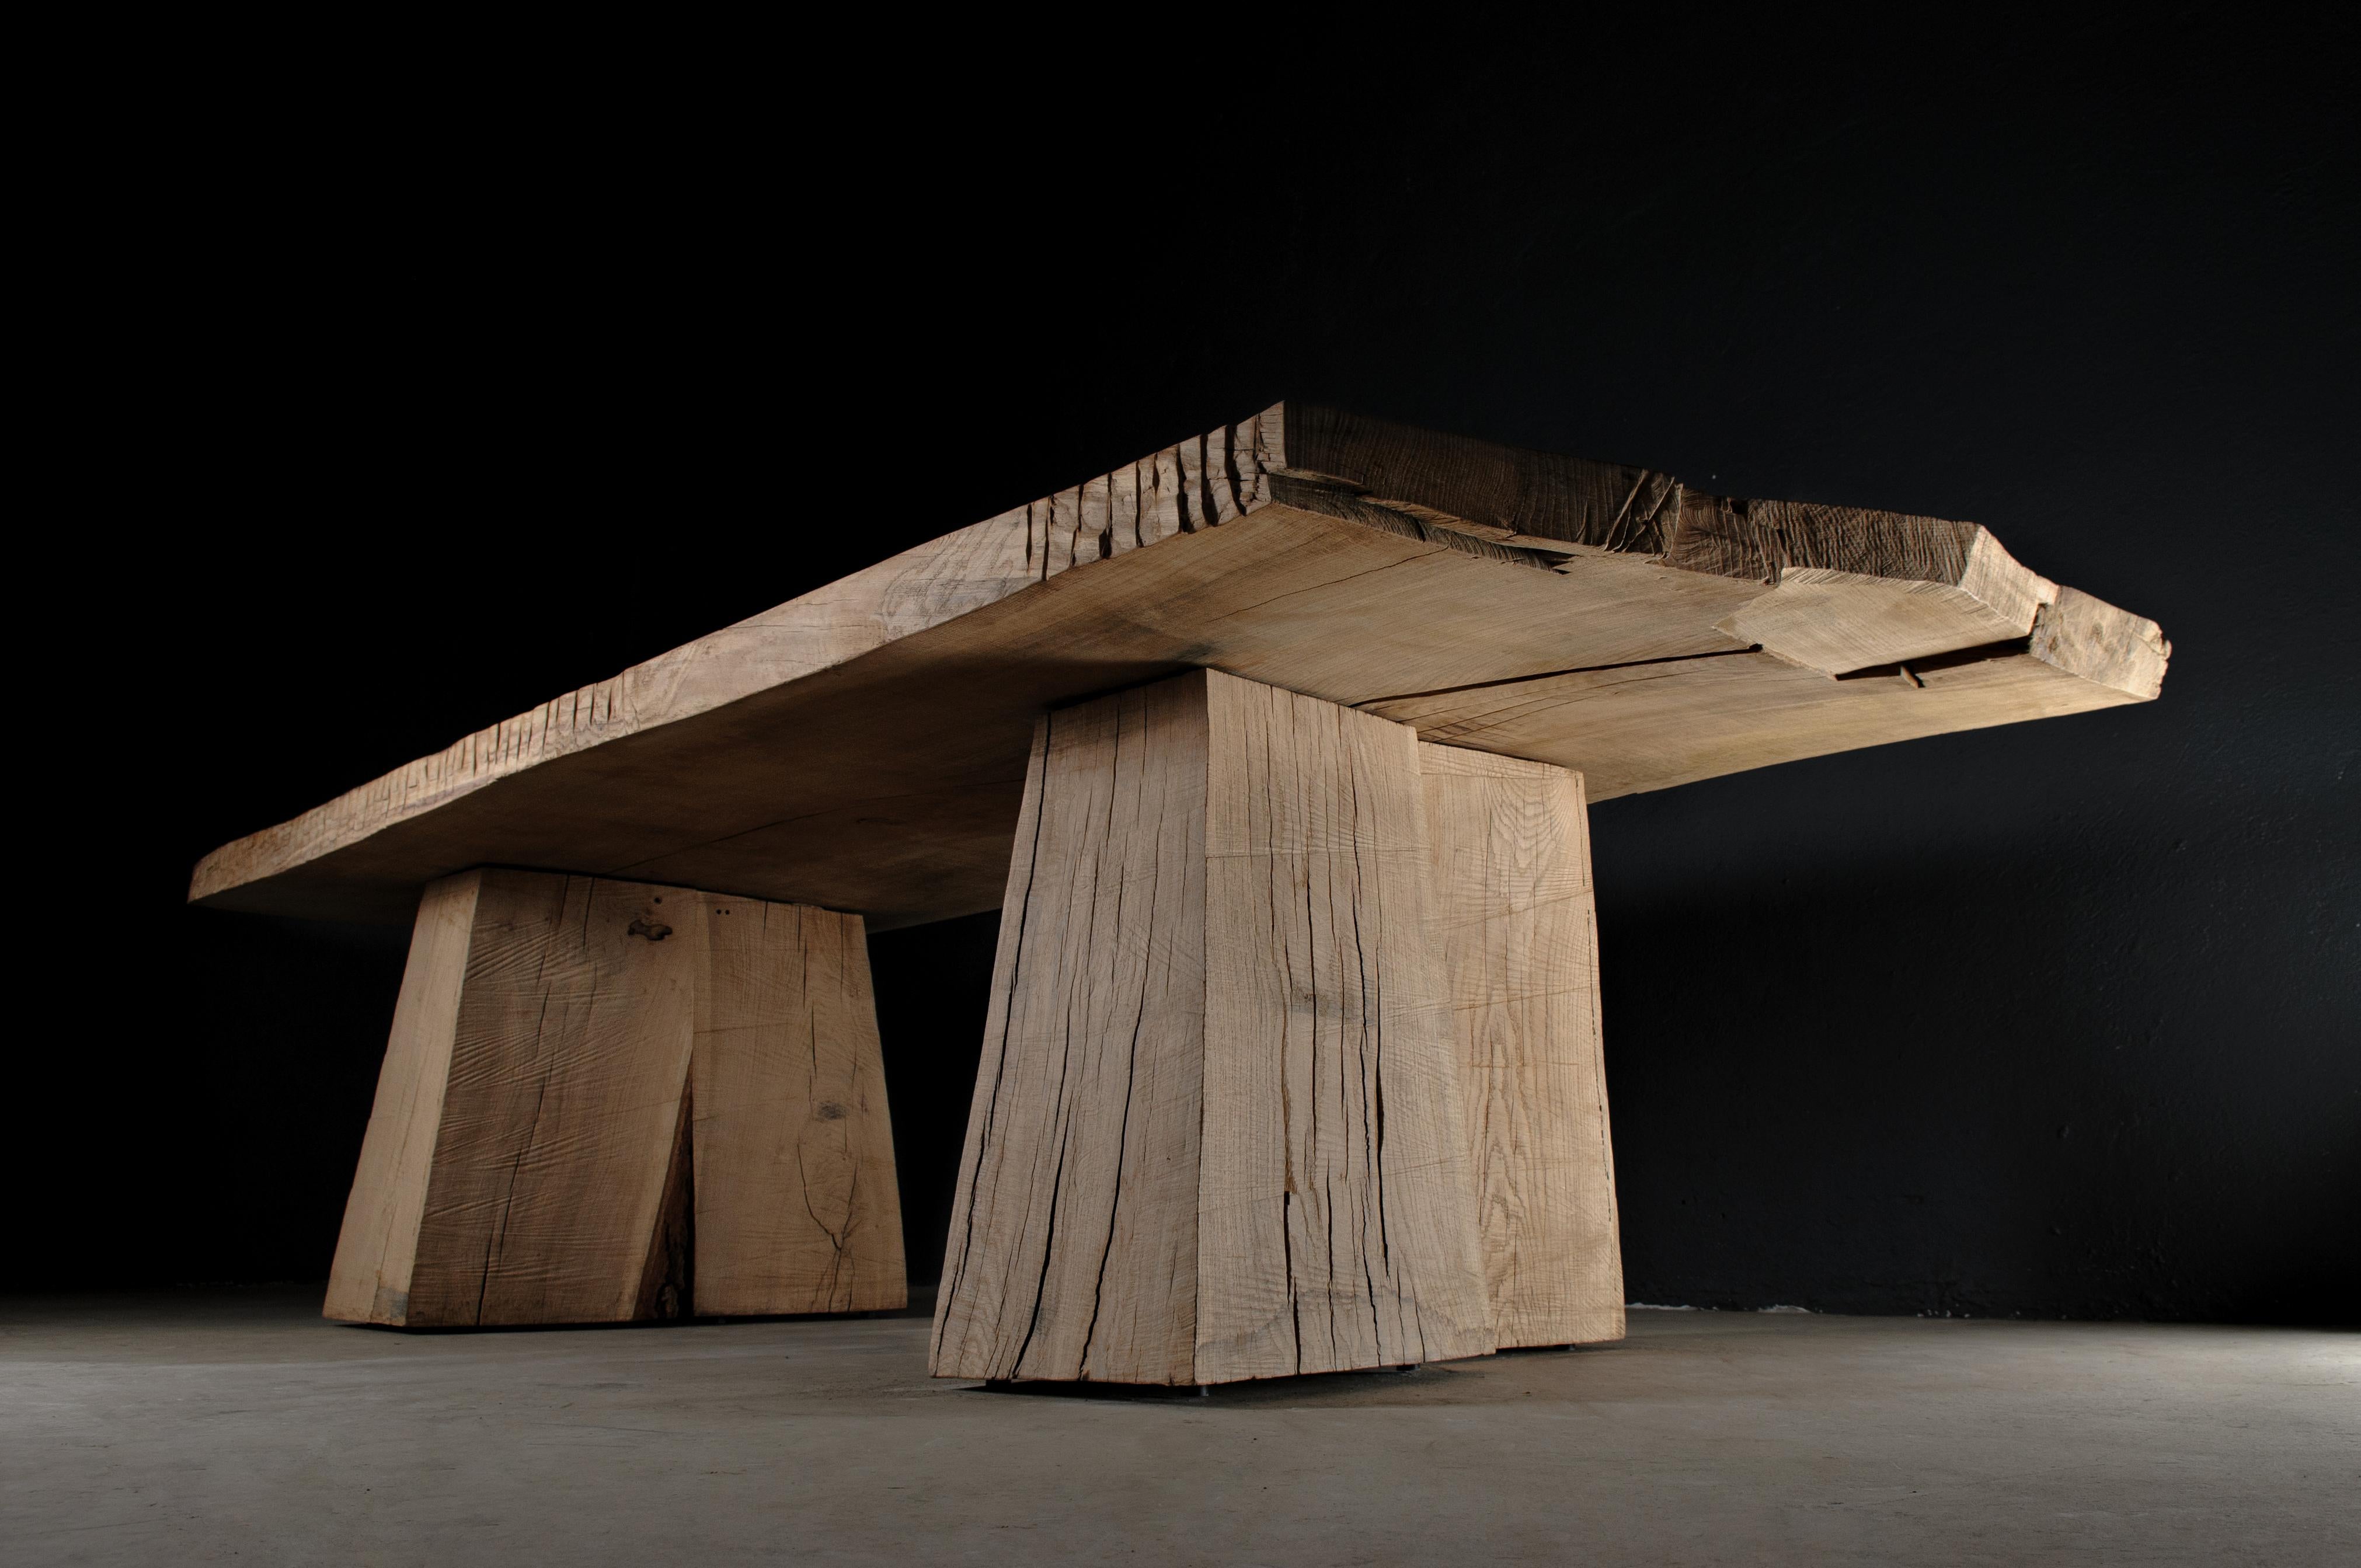 Massive dining table made of solid oak (+ linseed oil)
(Outdoor use OK)

Model shown :
300 cm x 100 cm x 77 cm

Warm furniture’s made by Denis Milovanov, founder of 'Soha Concept' design studio. Simplicity of shapes. Authentic